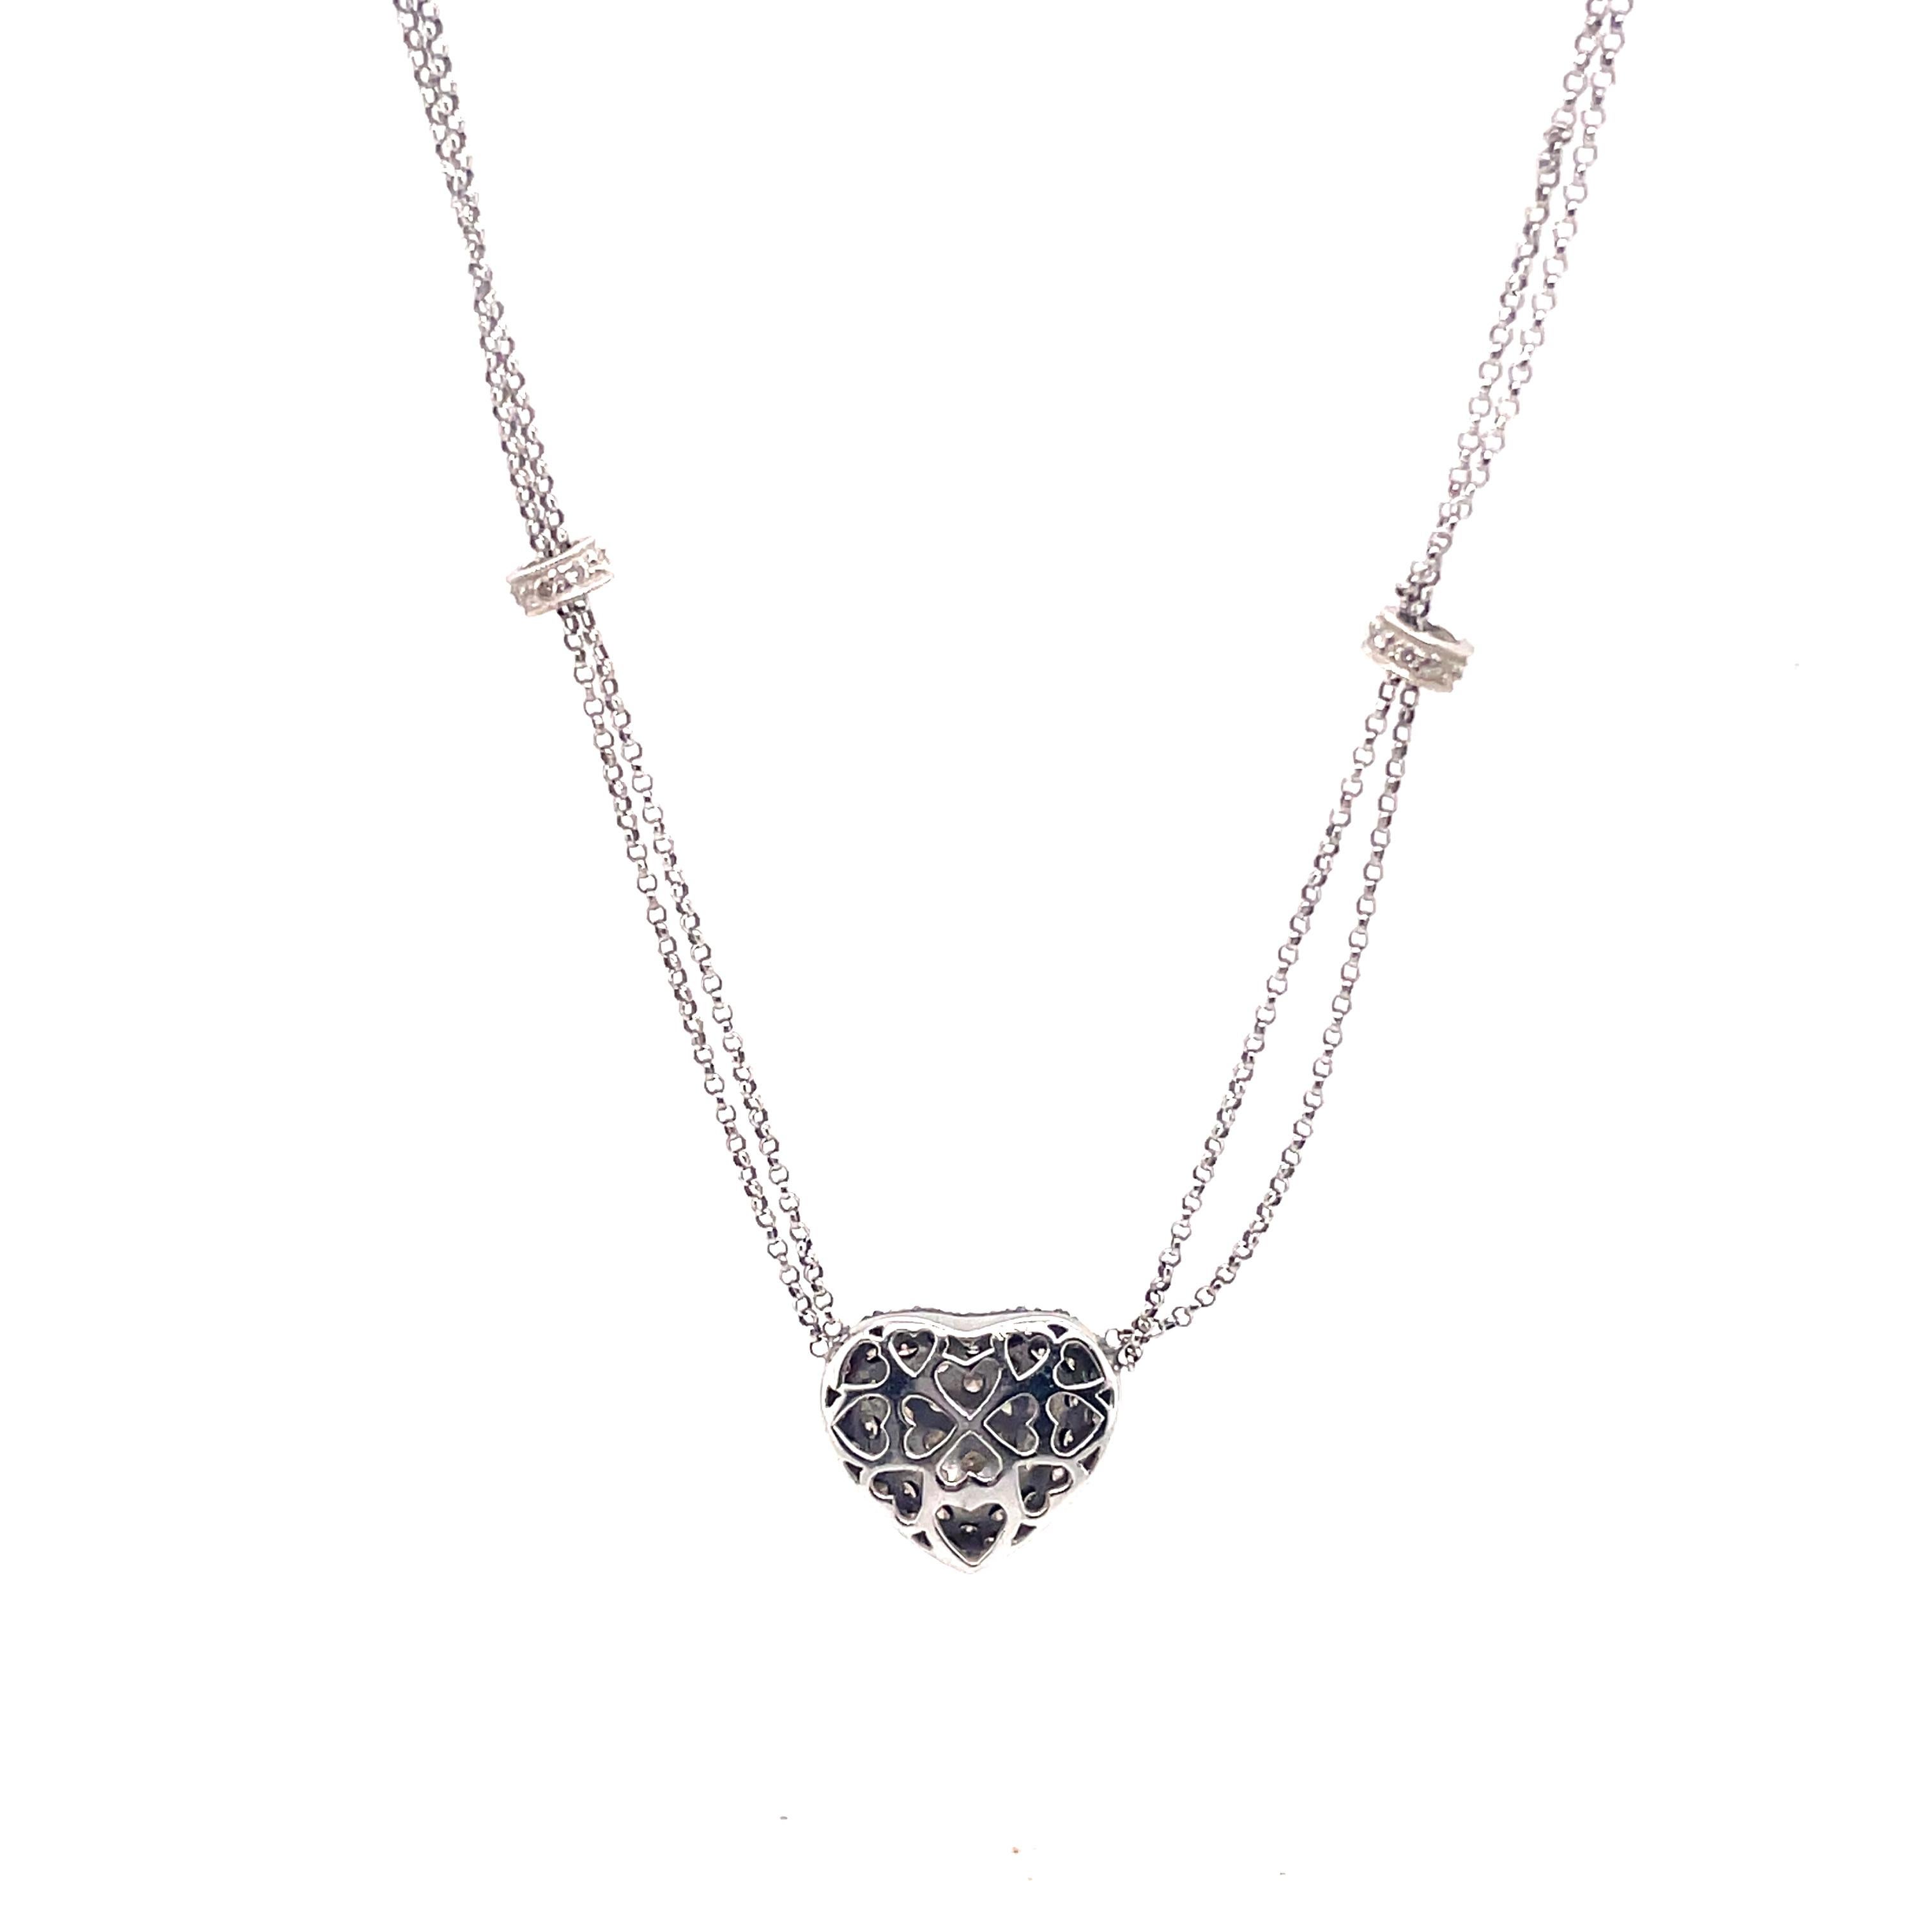 Apx 1.25ct Brown Diamond Heart Pave Necklace 18k White Gold In New Condition For Sale In BEVERLY HILLS, CA